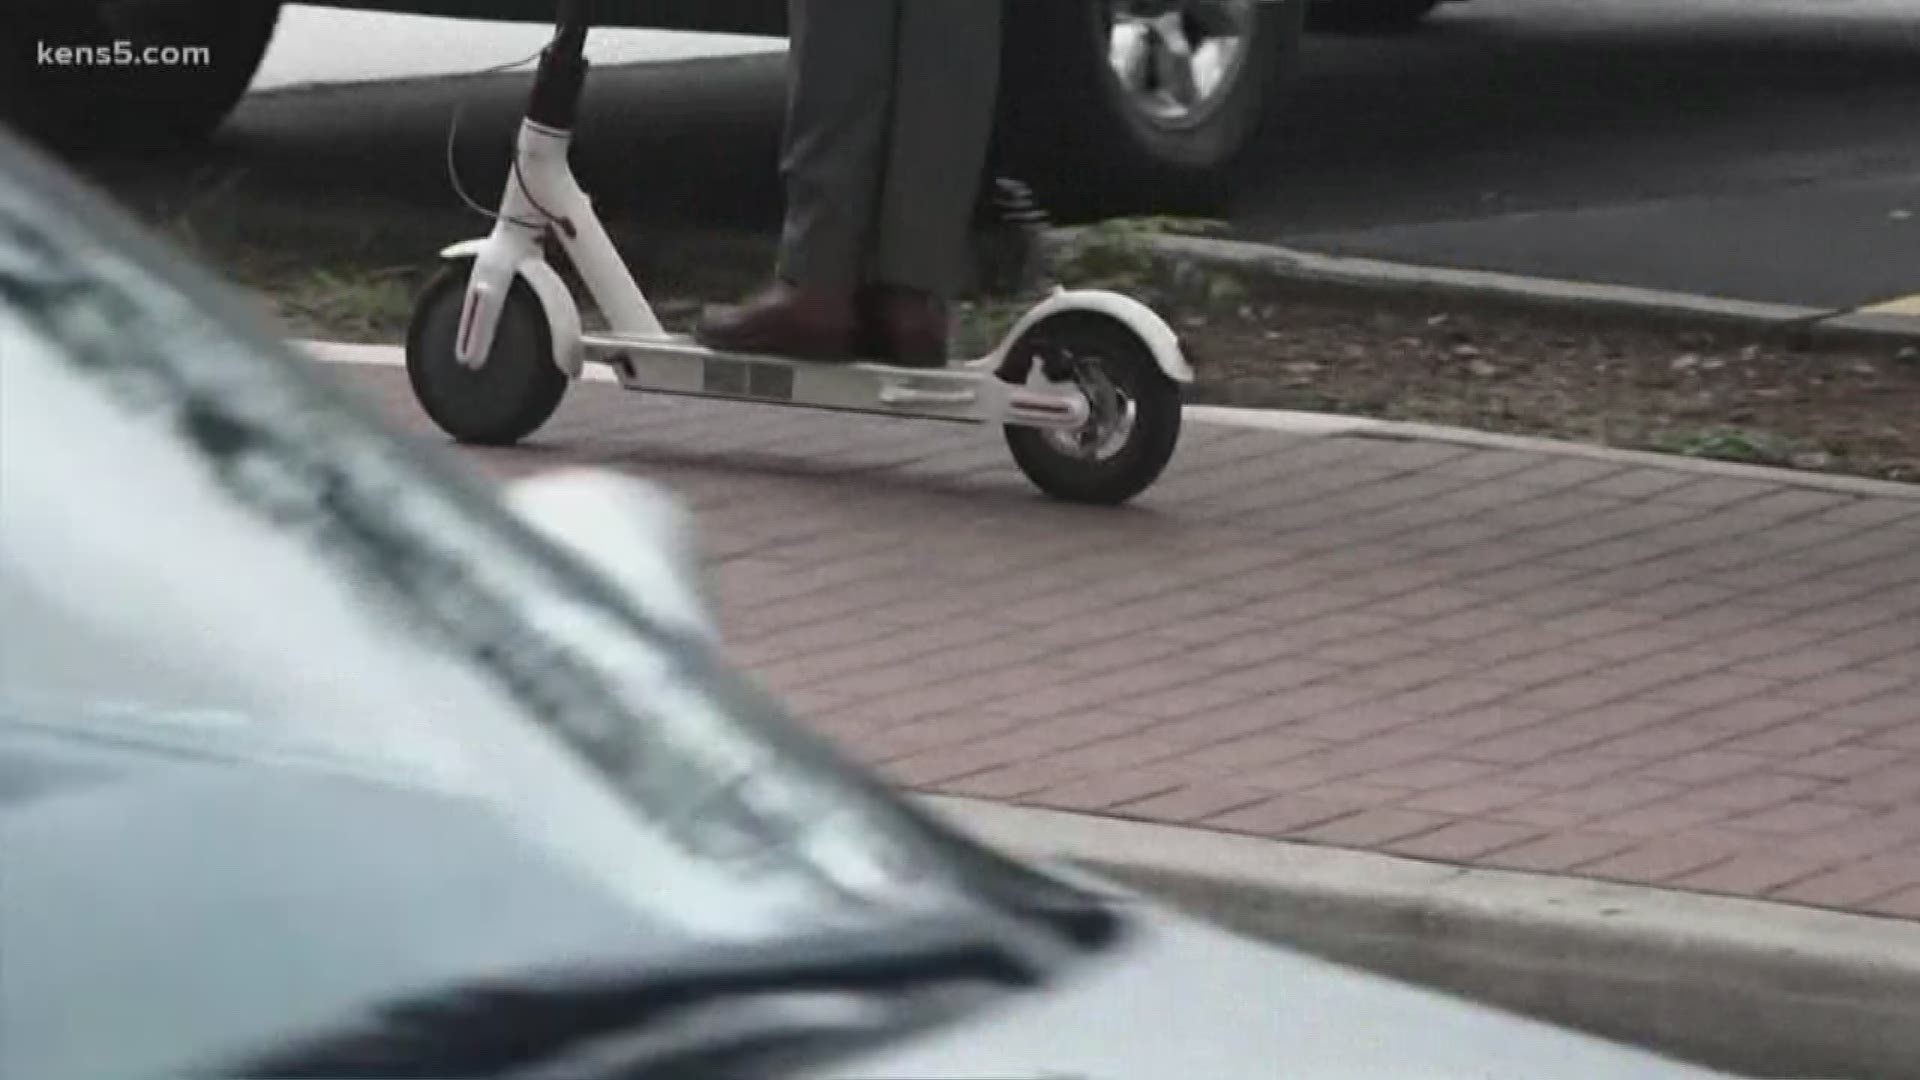 San Antonio is putting the brakes on e-scooters around town.